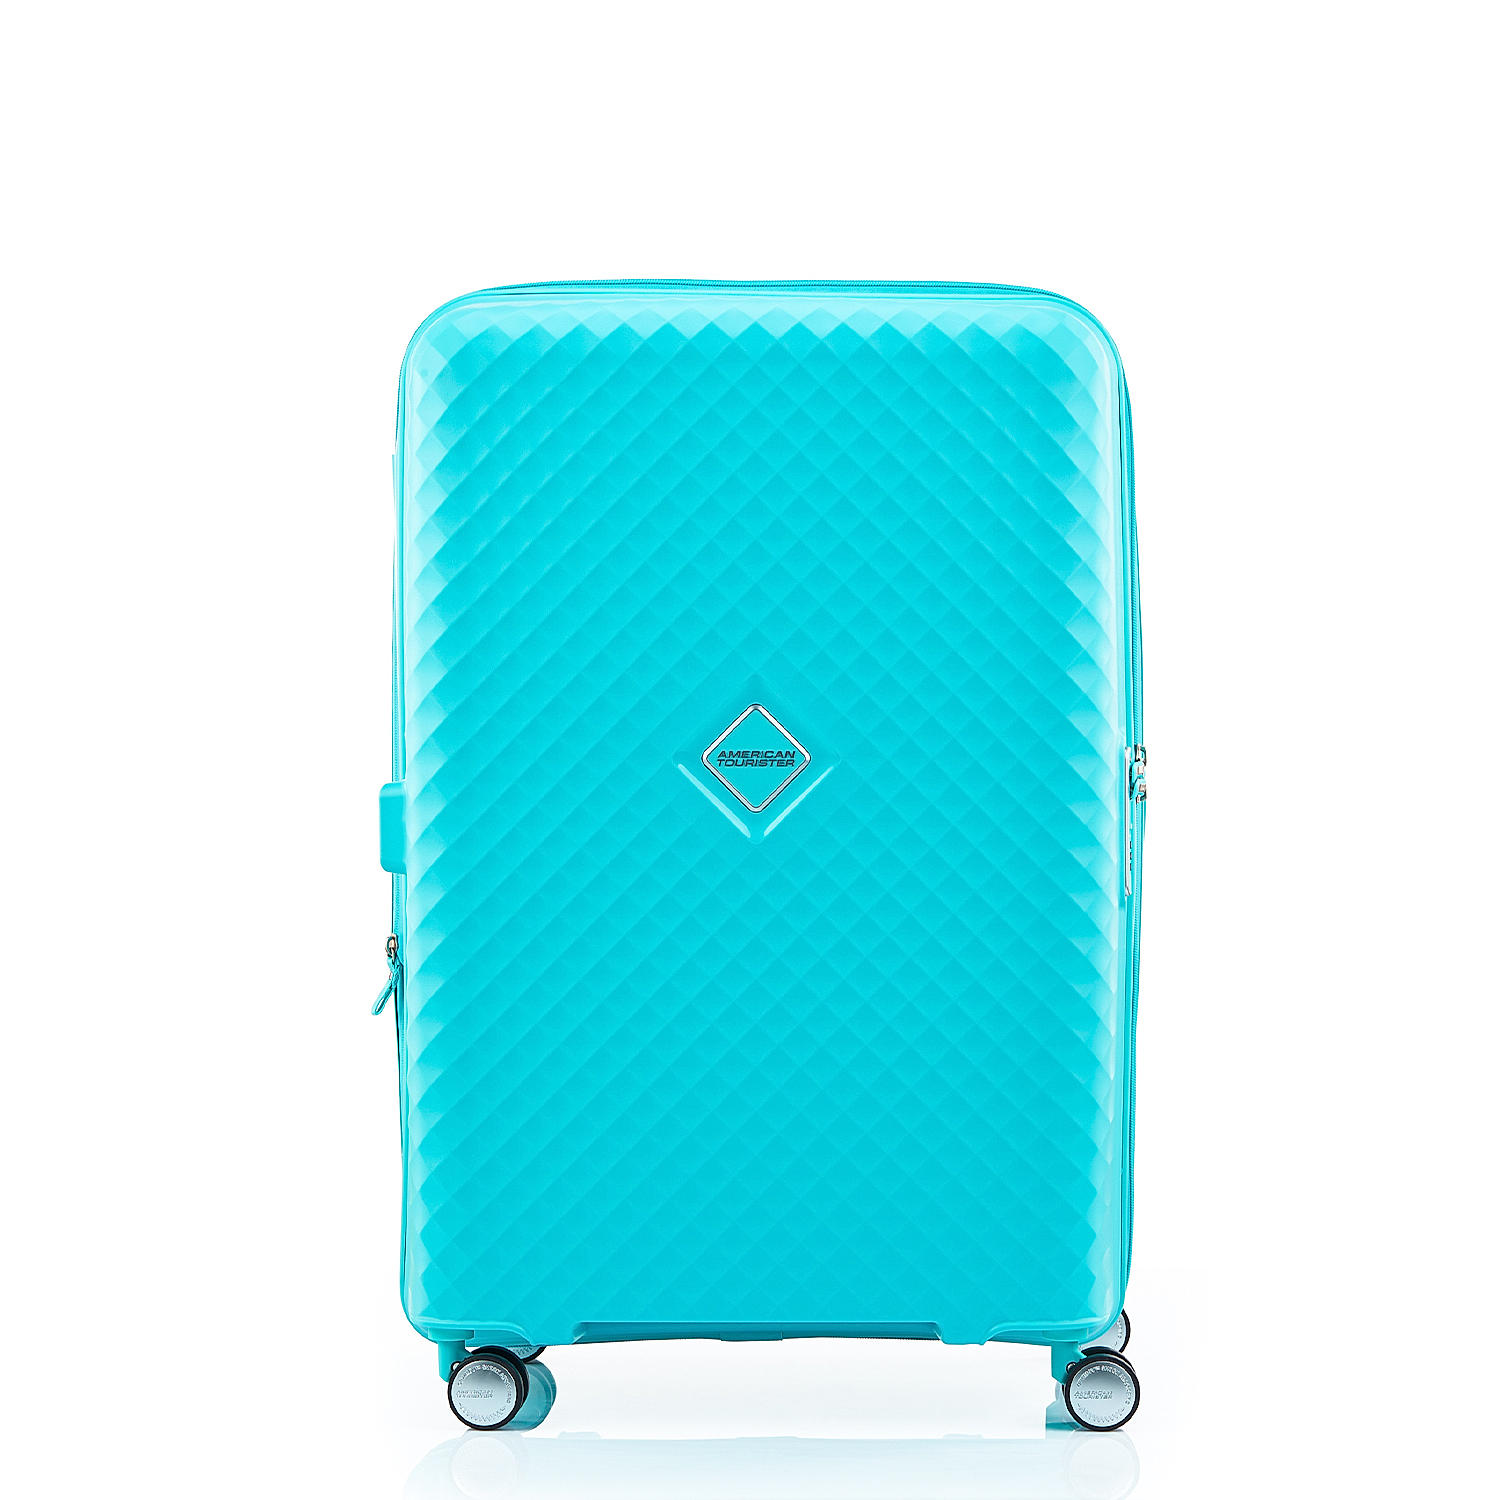 American Tourister Trolley Bag for Travel | Splash 55 Cms Polycarbonate  Hardsided Small Cabin Luggage Bag